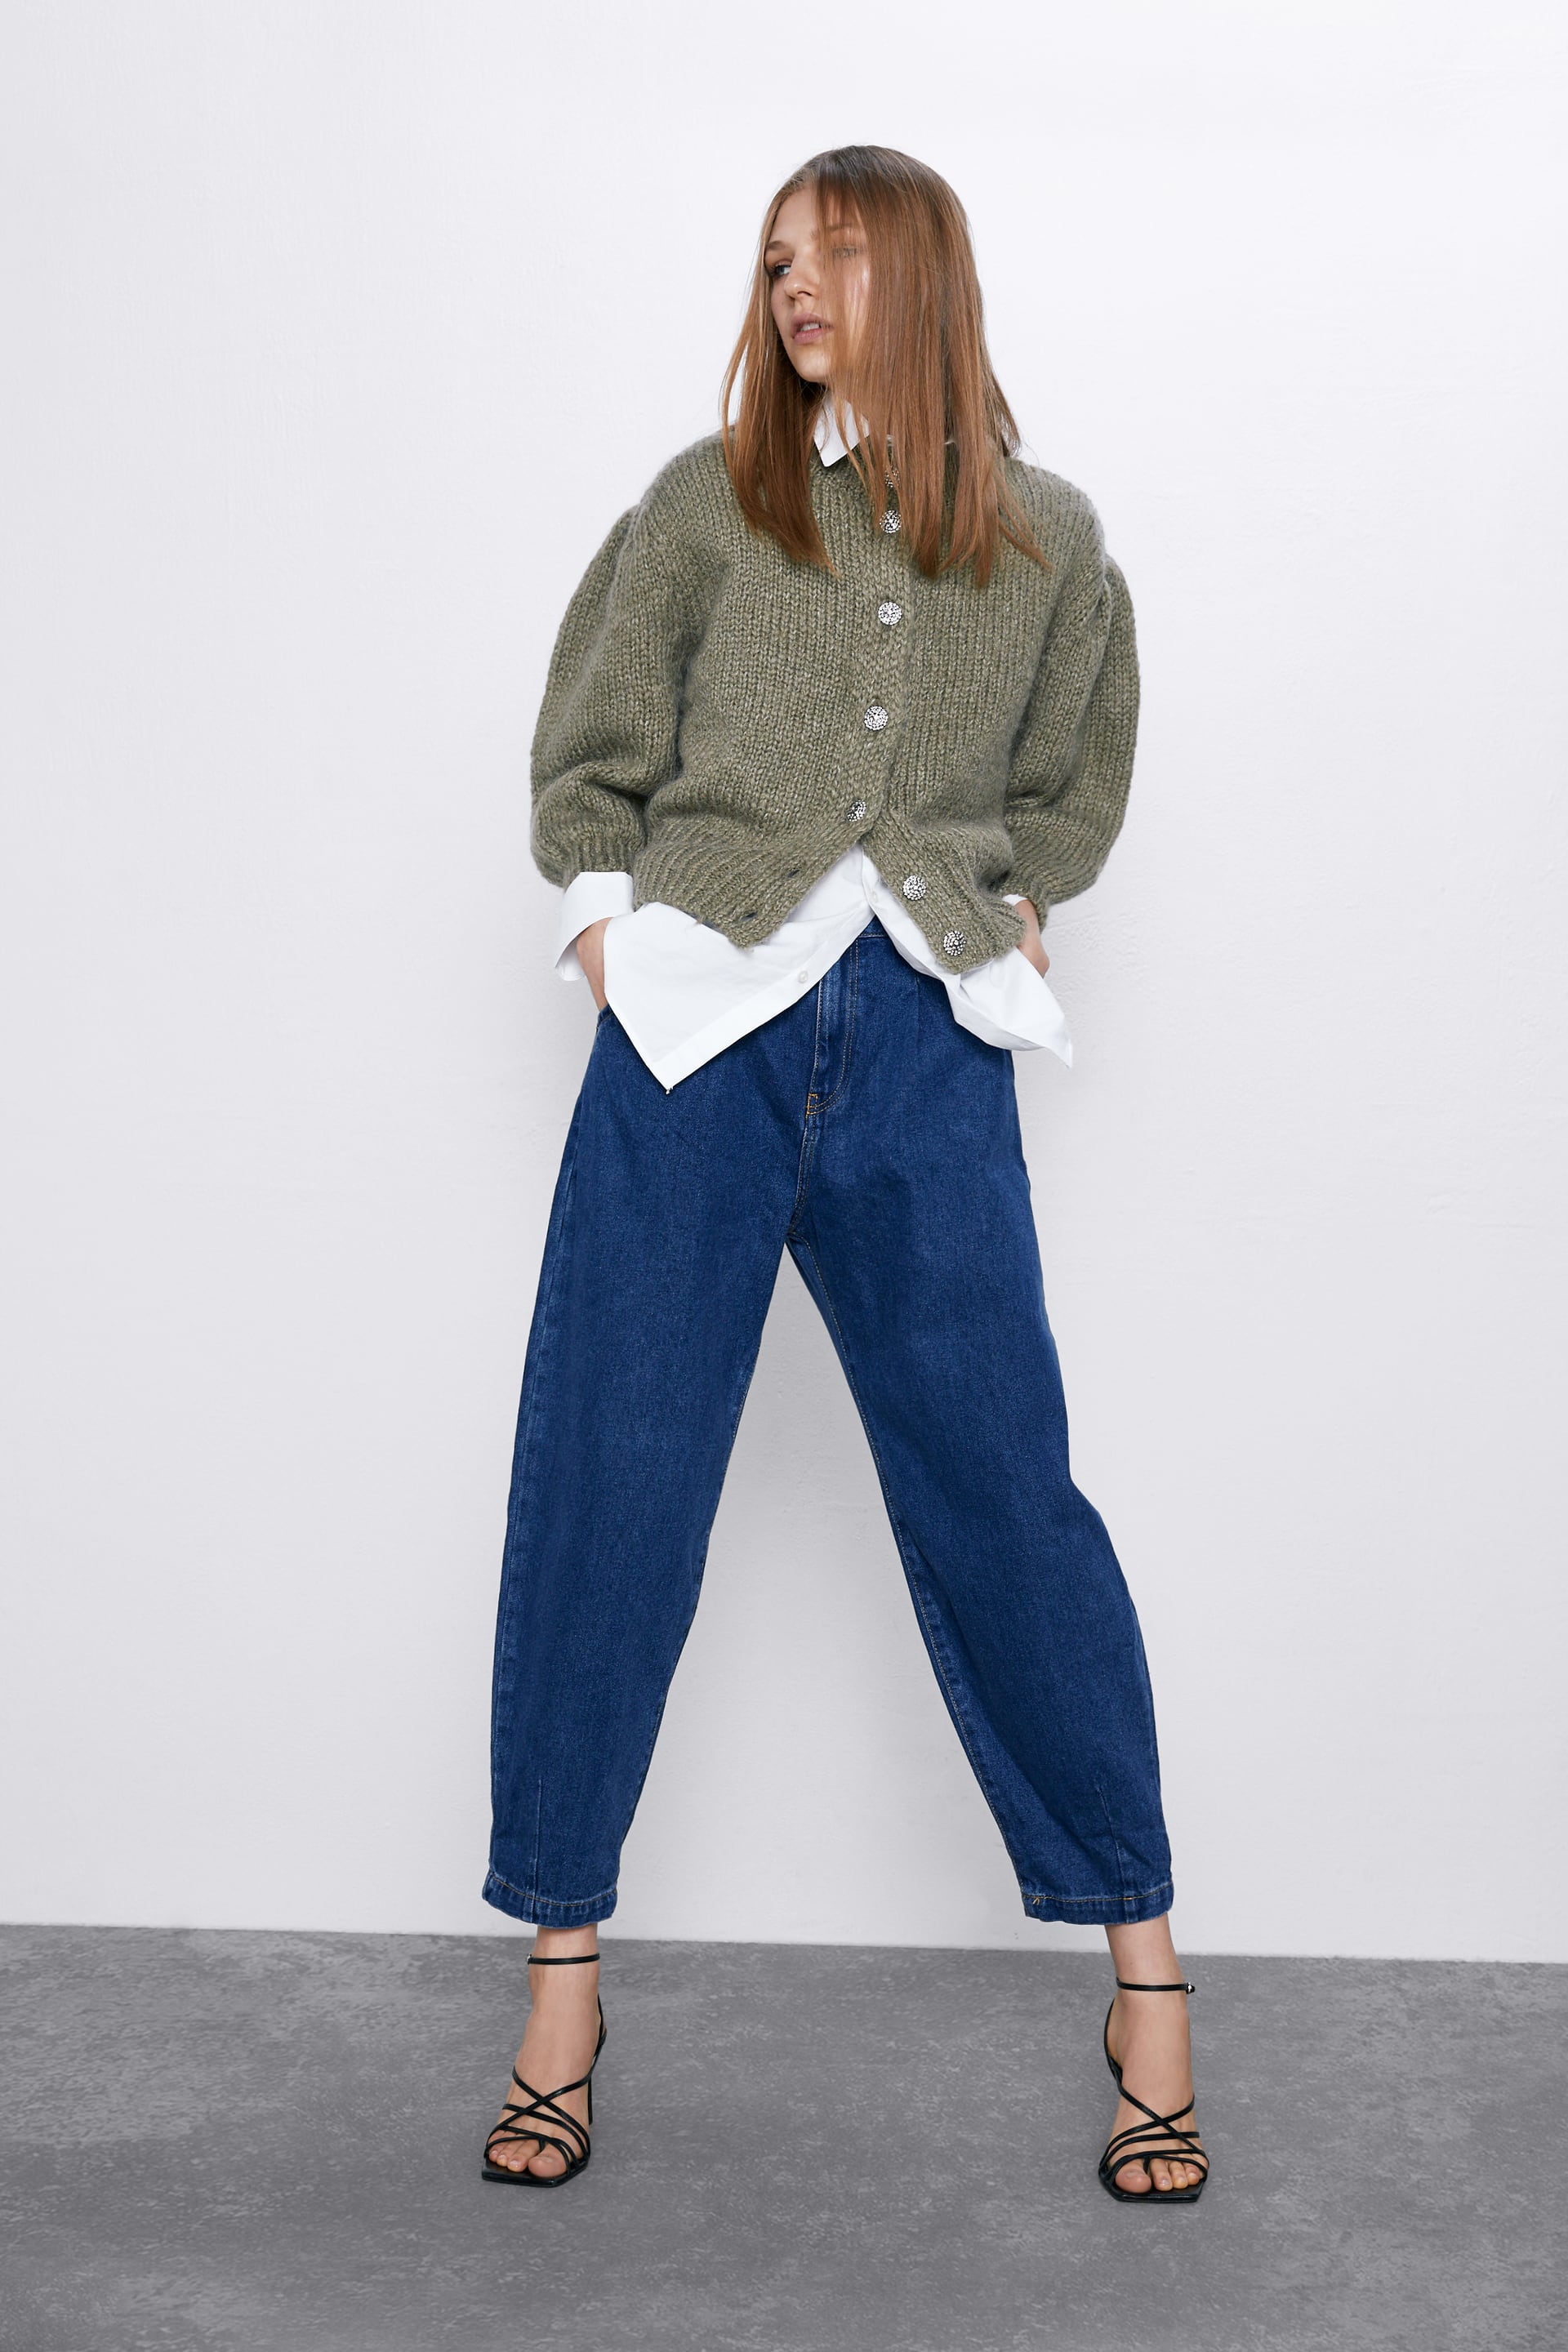 Buy > style slouchy jeans> in stock OFF-65%